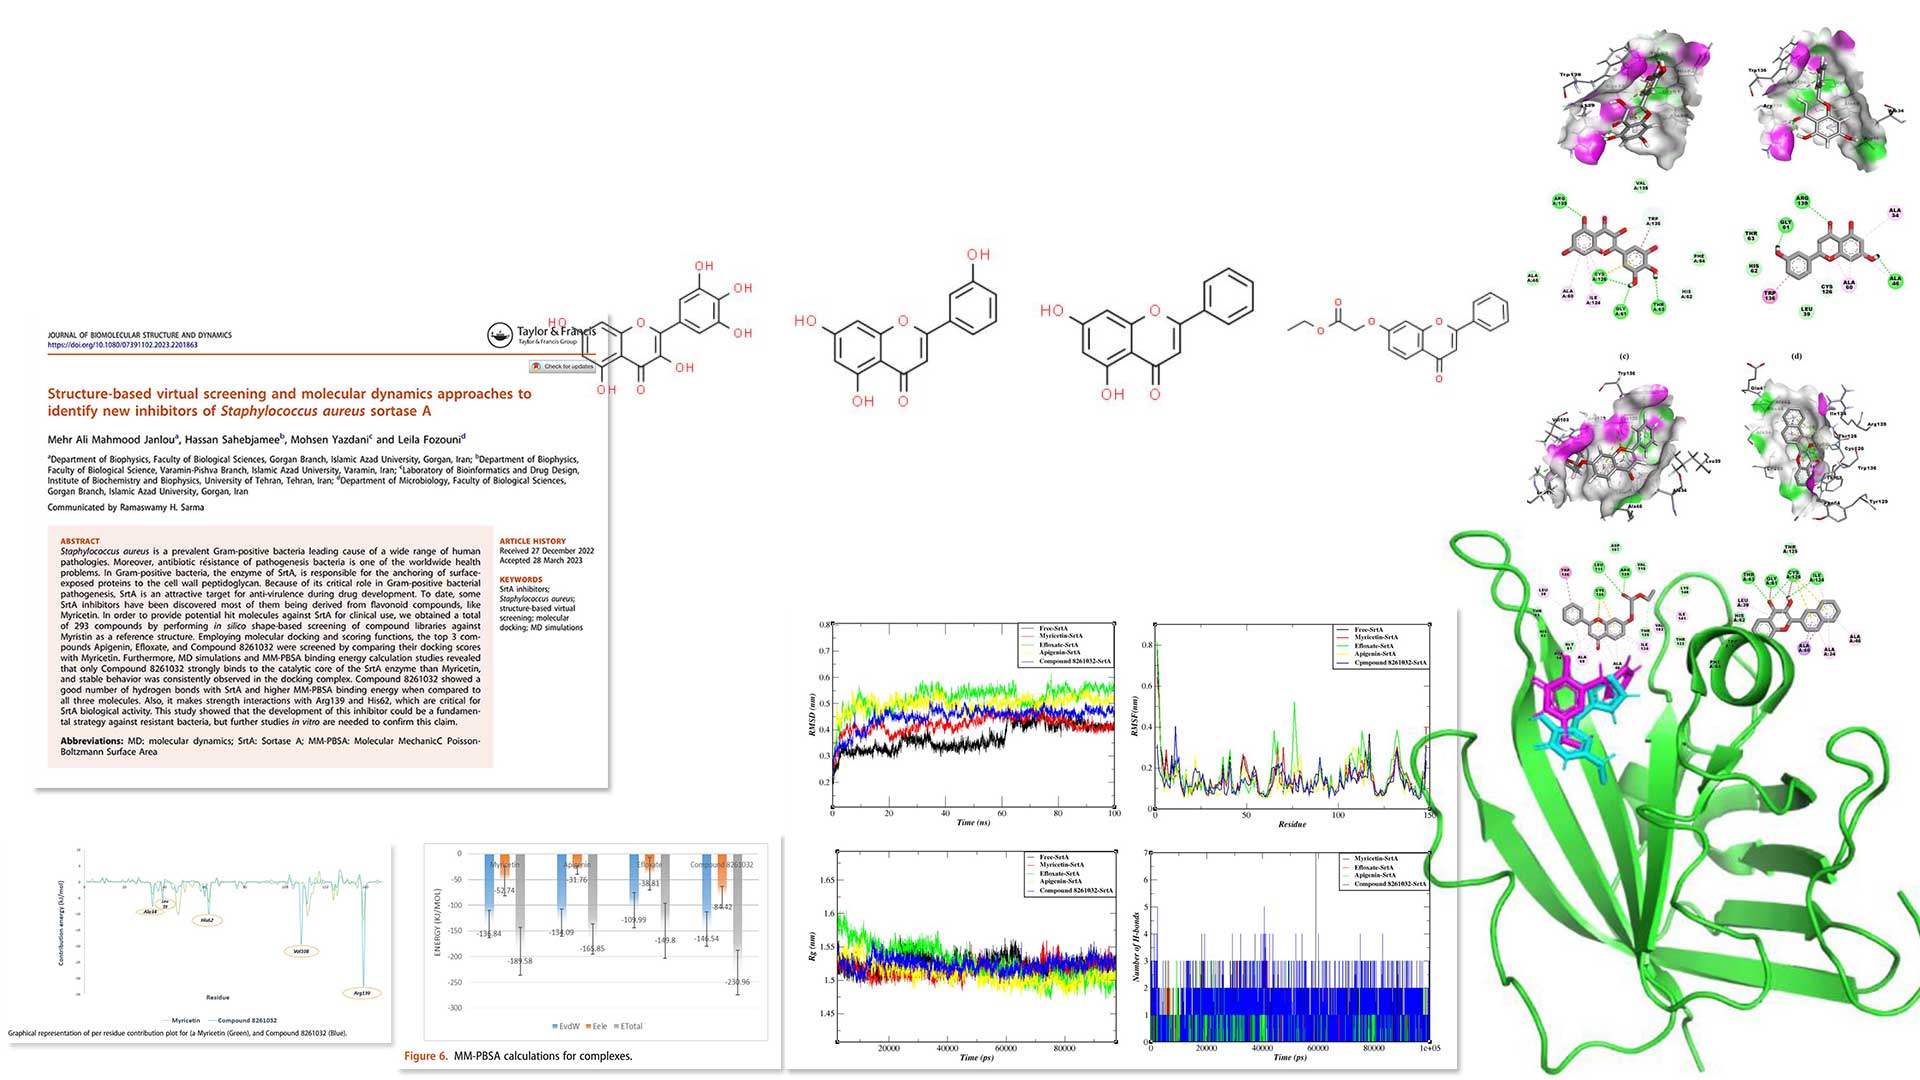 Structure-based virtual screening & MD,new inhibitors of Staphylococcus aureus sortase A